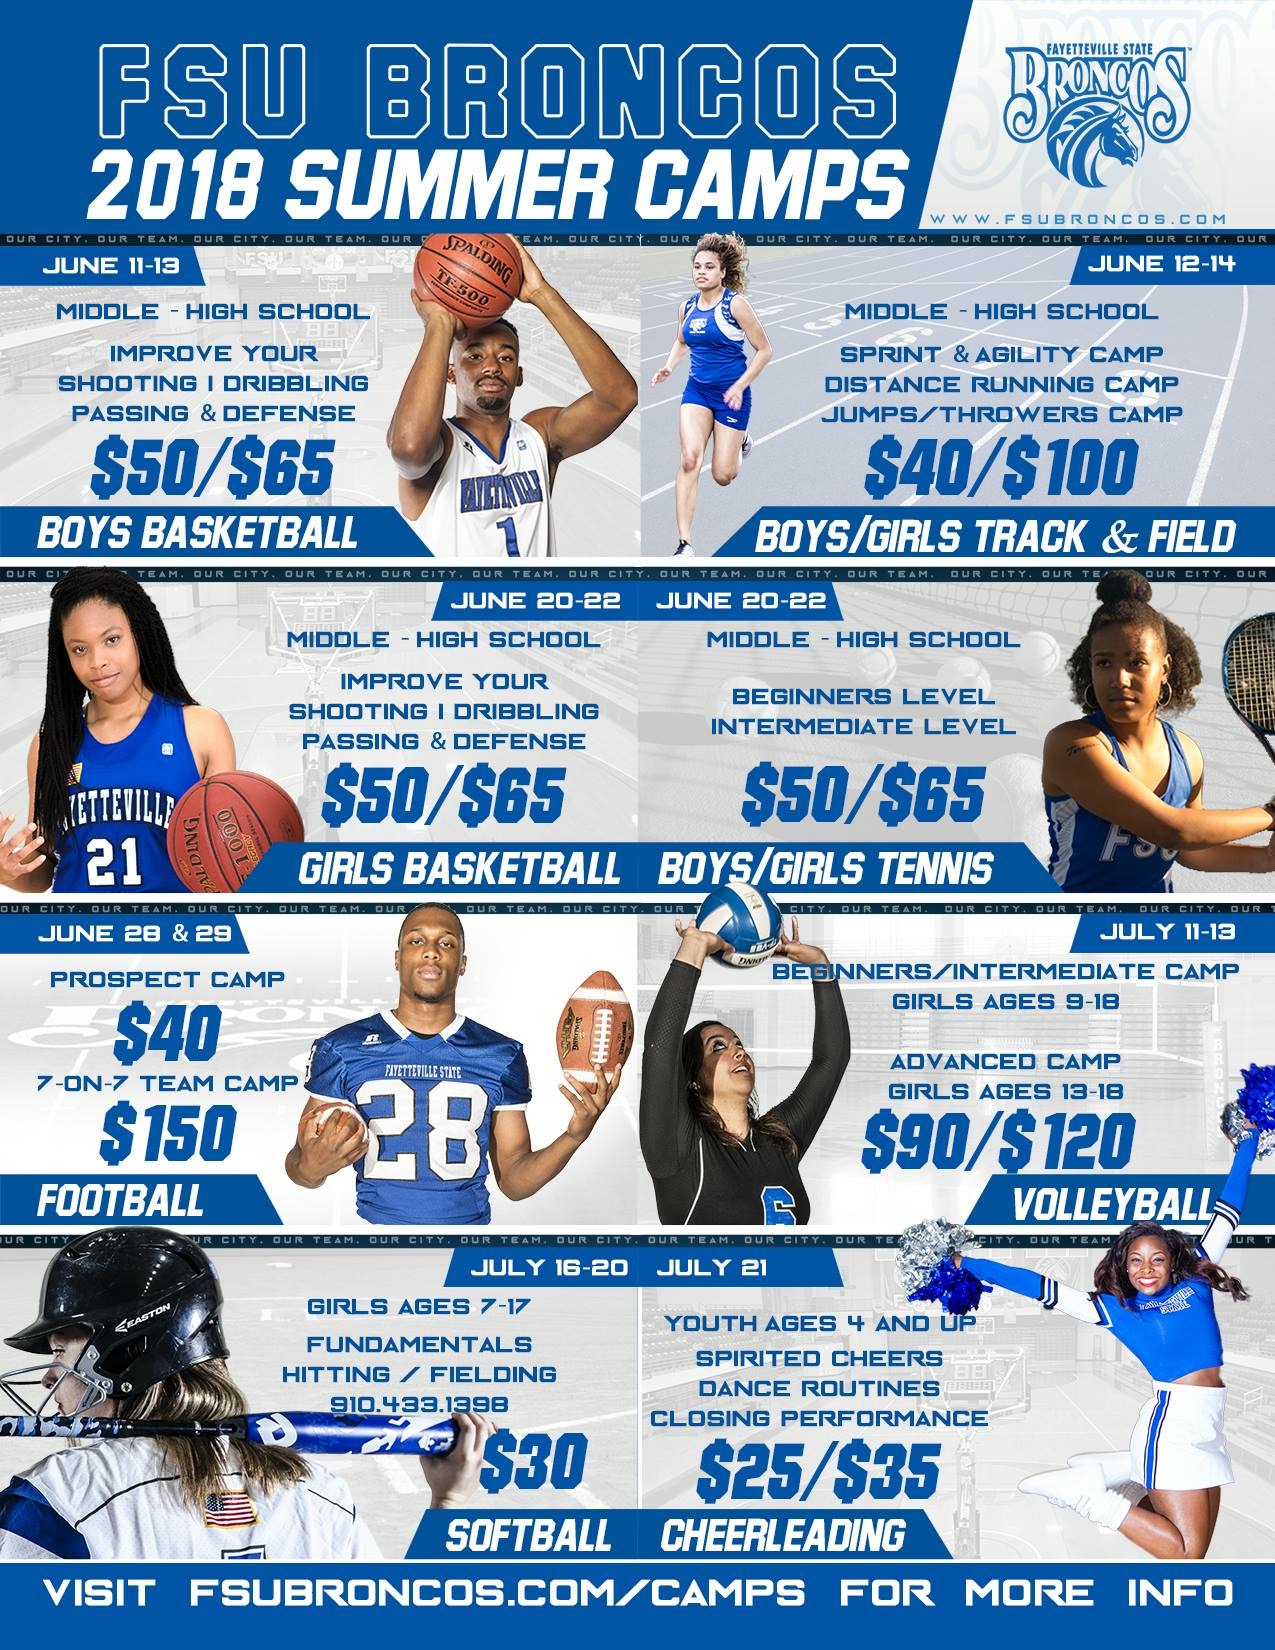 Camps Flyer - view website for details